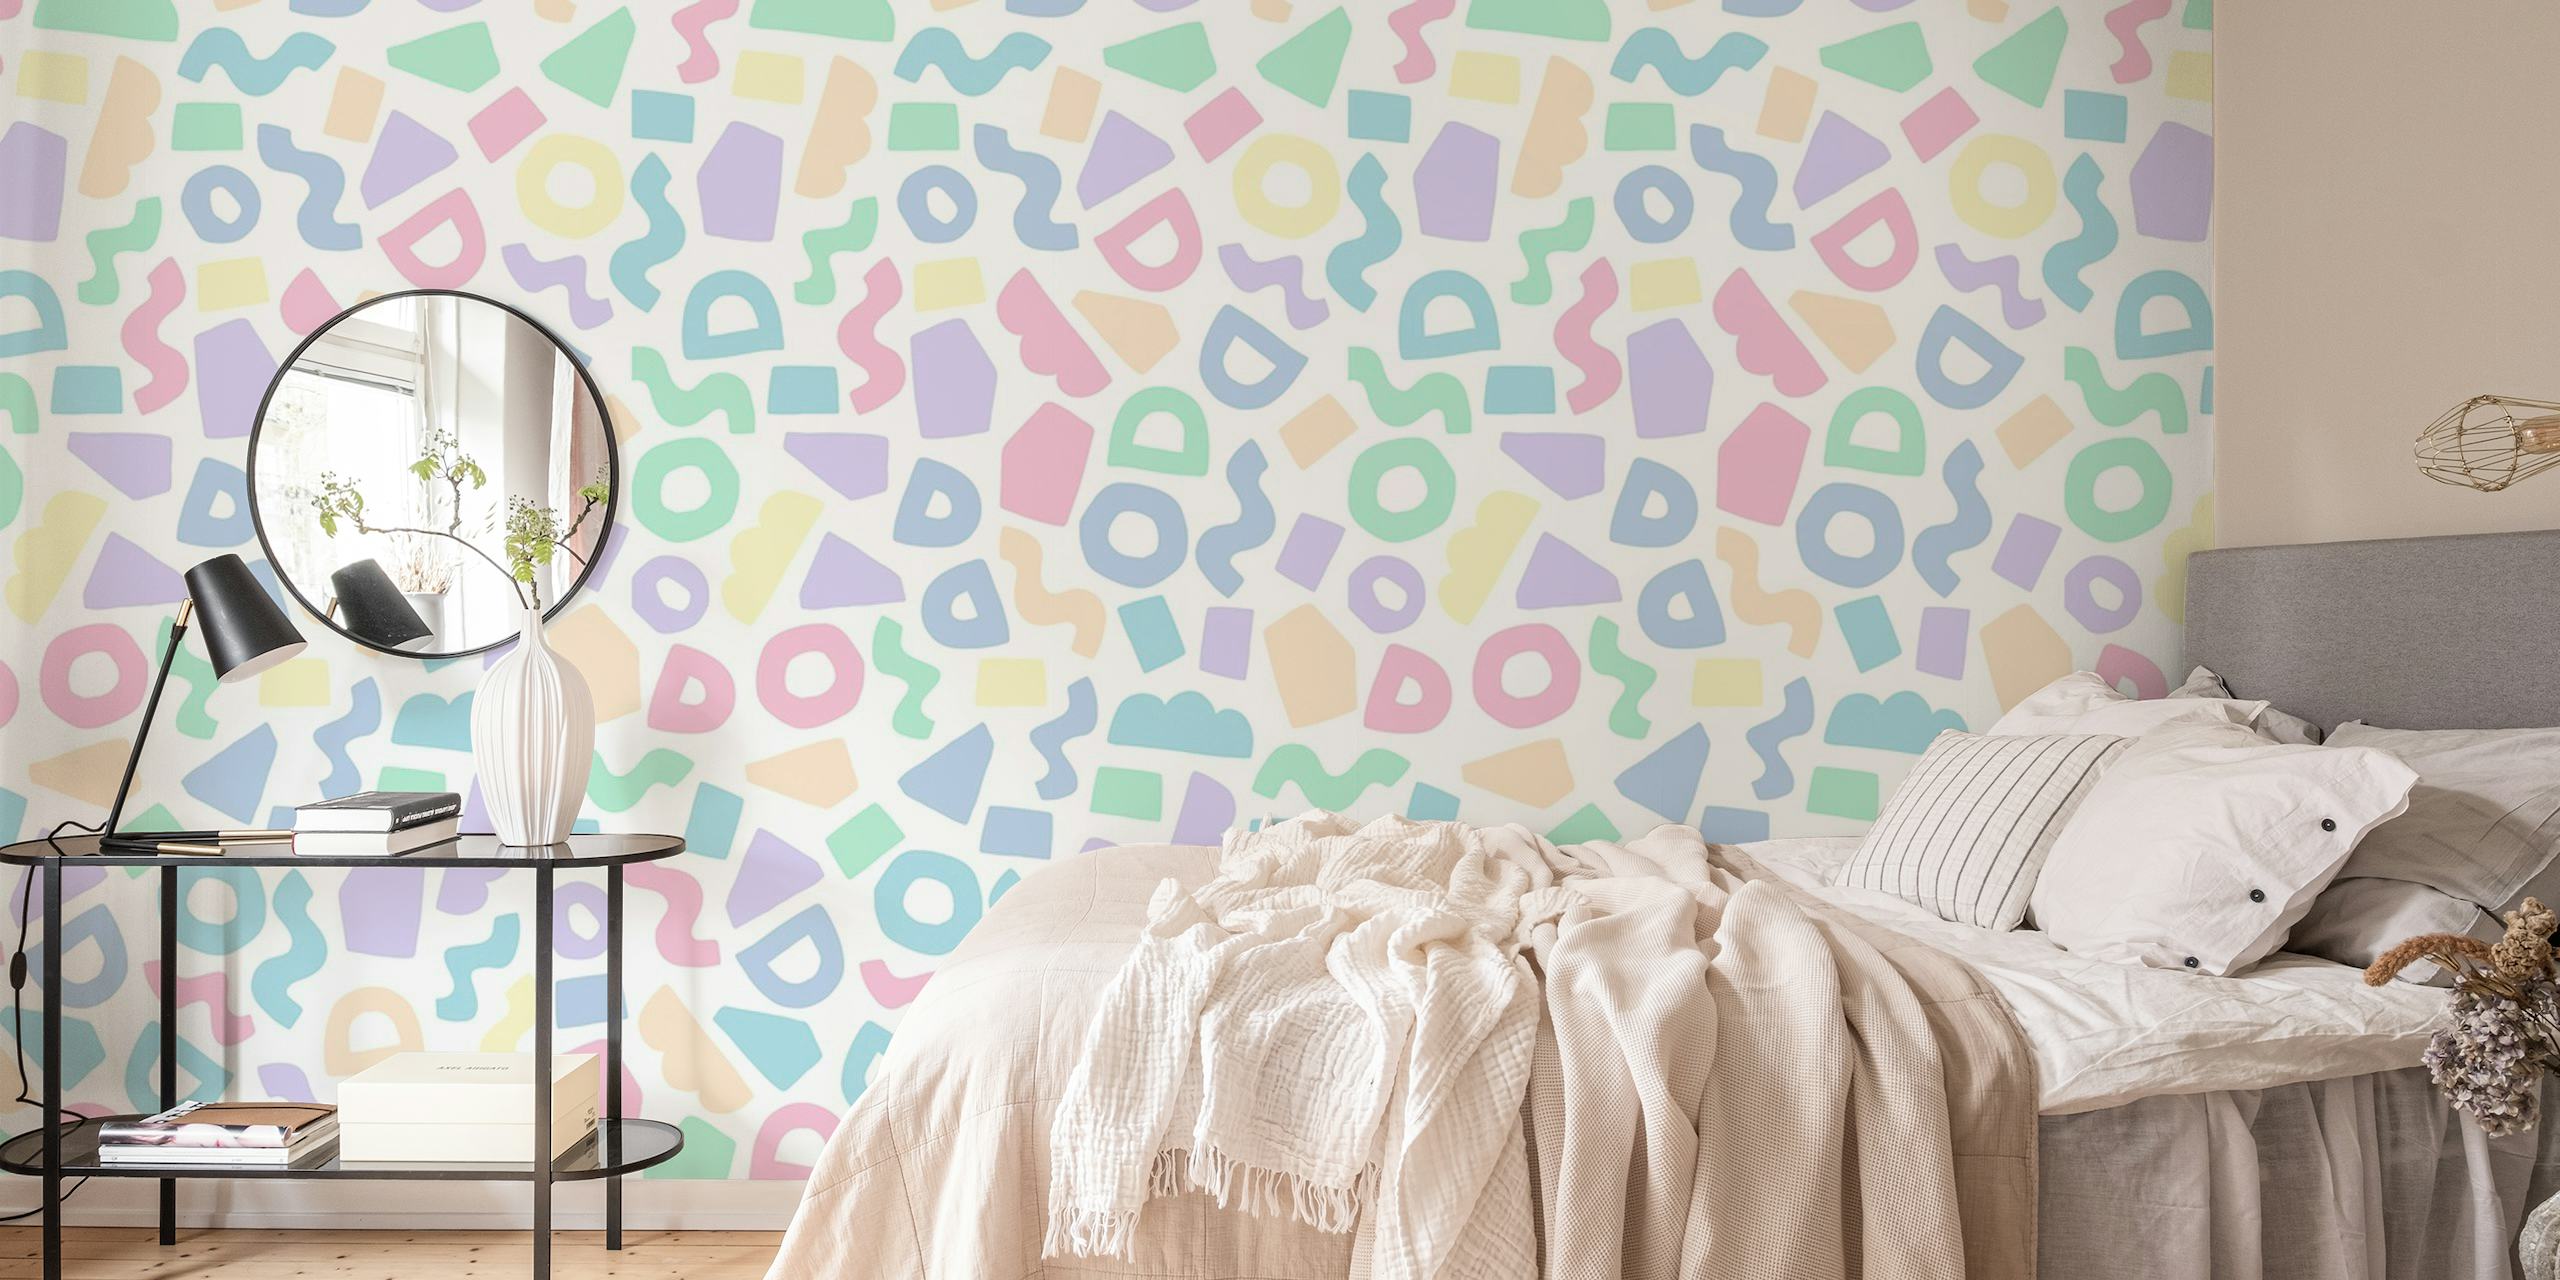 Colorful rainbow abstract shapes pattern for wall mural